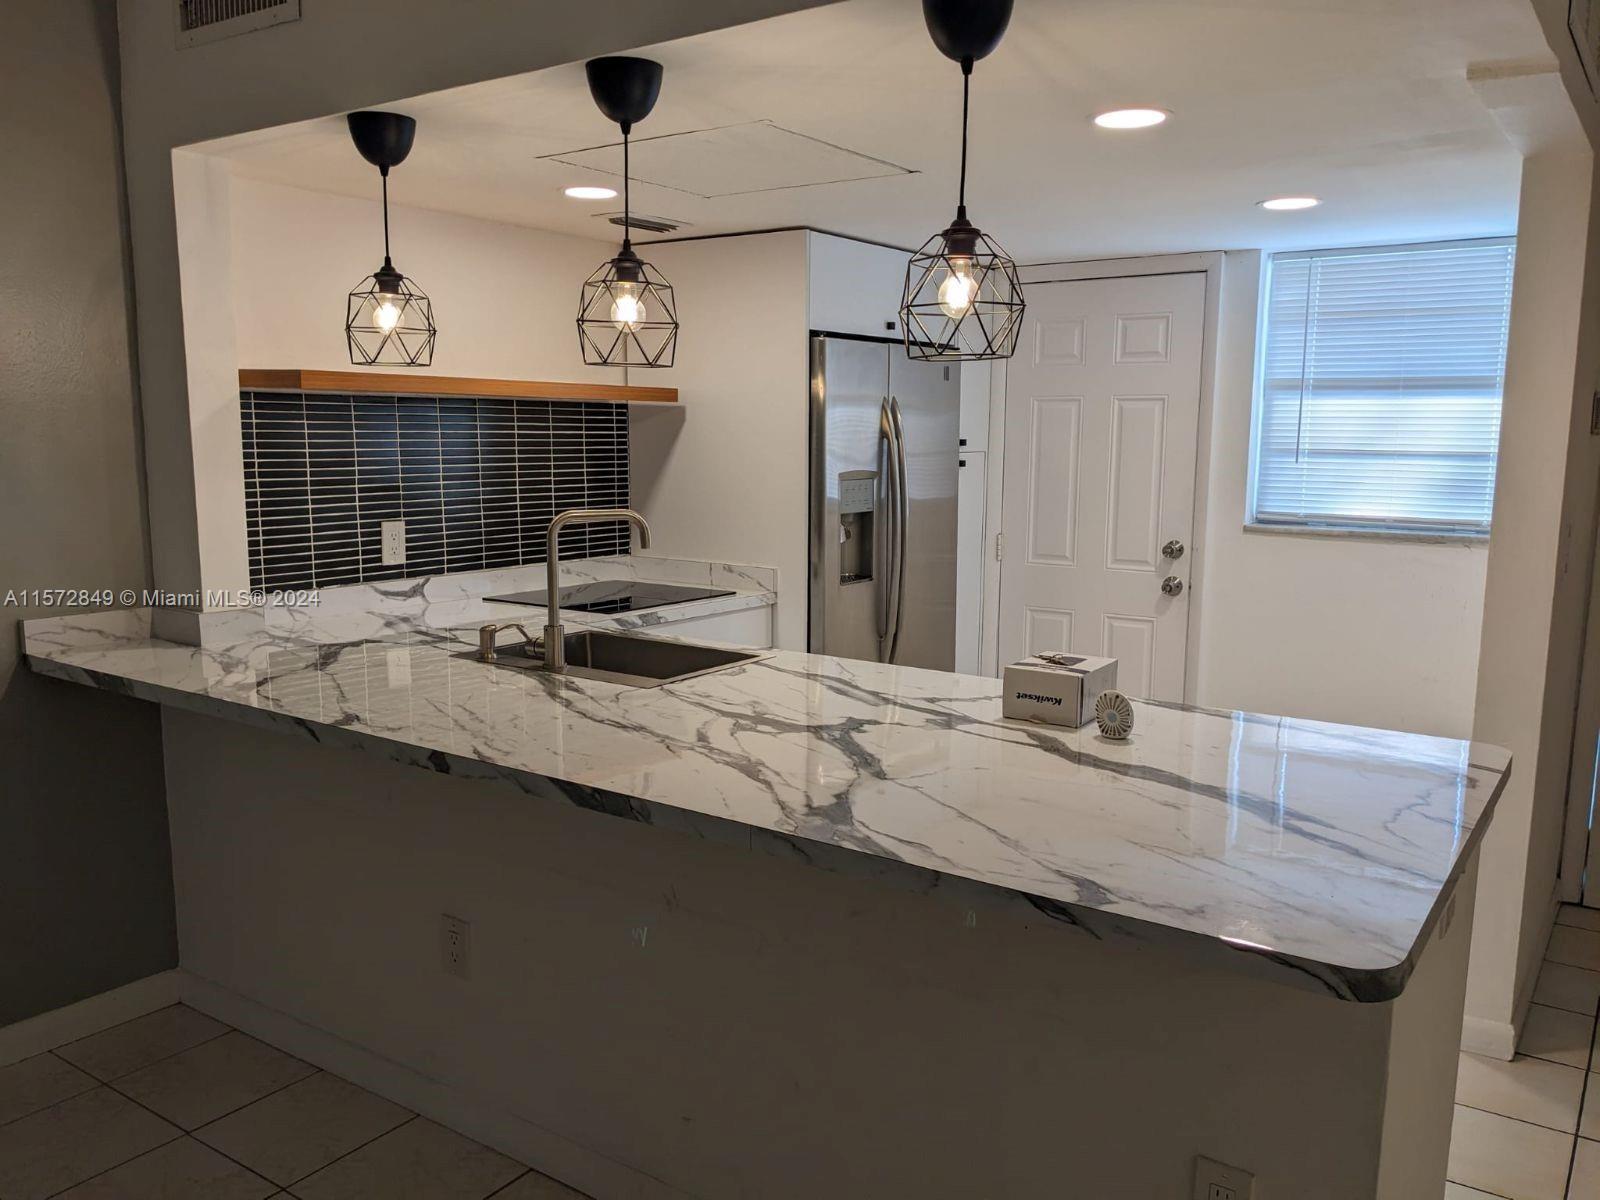 a kitchen with center island a sink stainless steel appliances and a chandelier